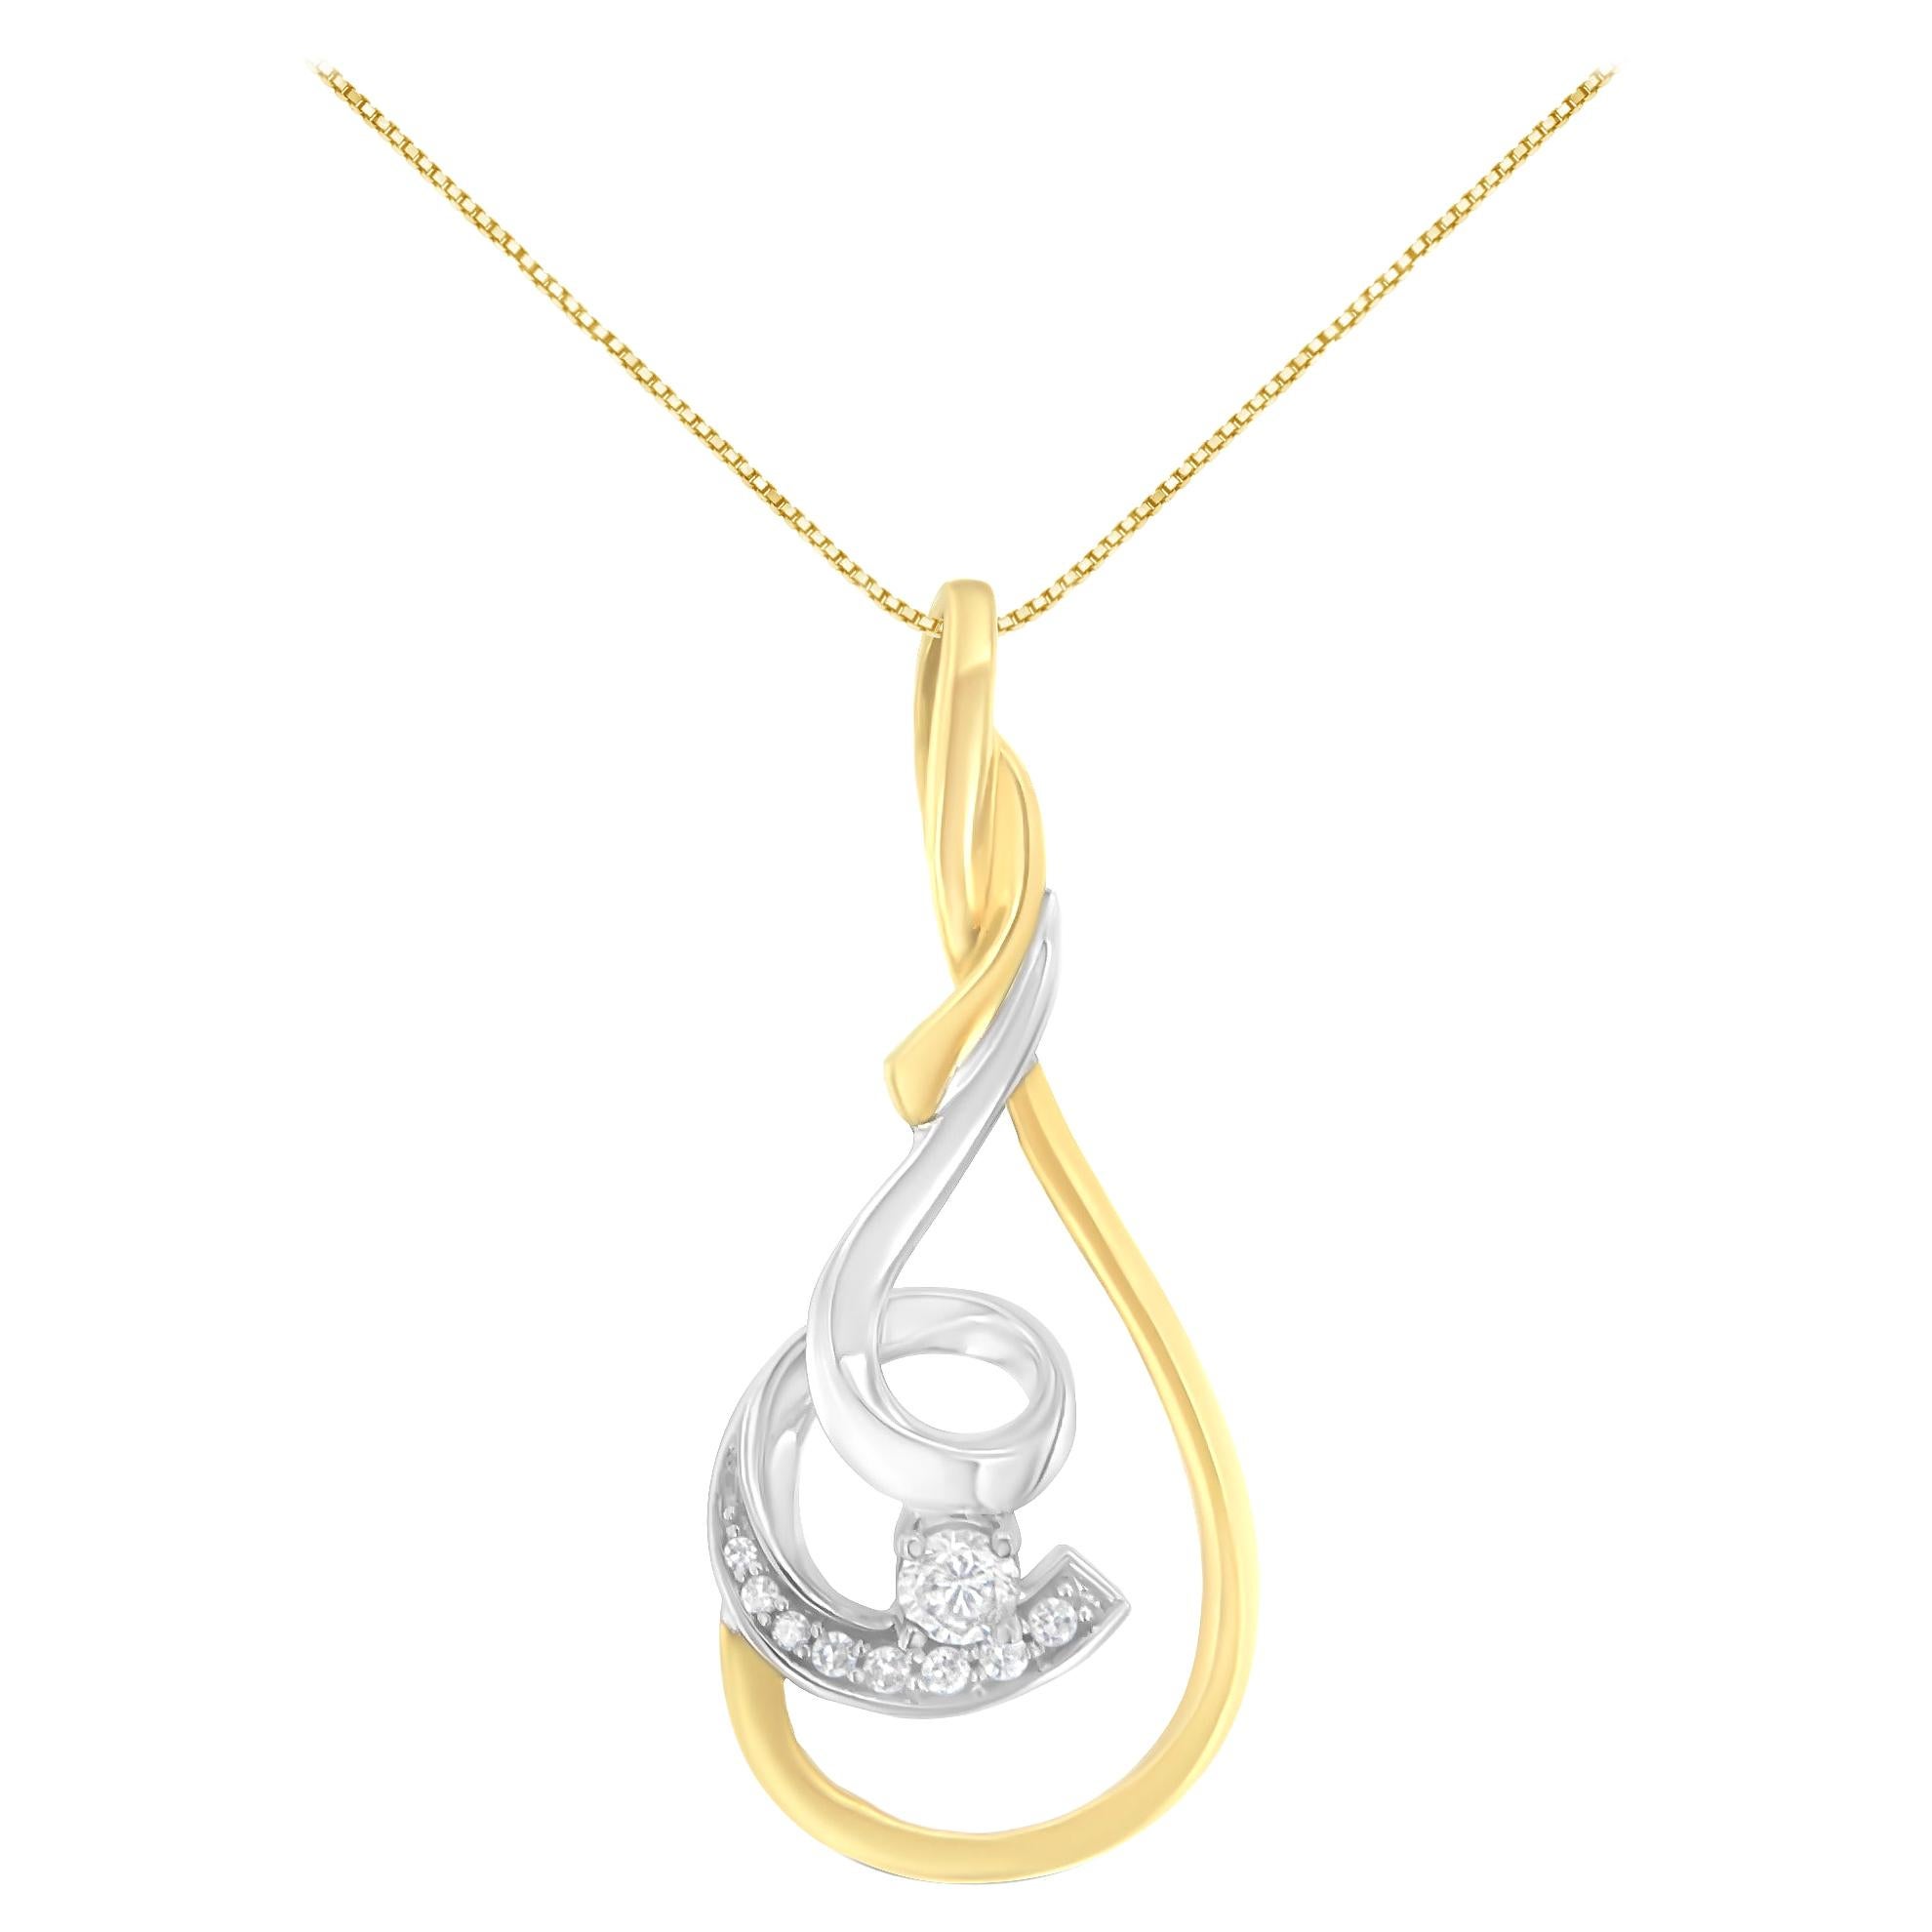 10k Two-Toned Gold 1/6 Carat Diamond Spiral Pendant Necklace For Sale